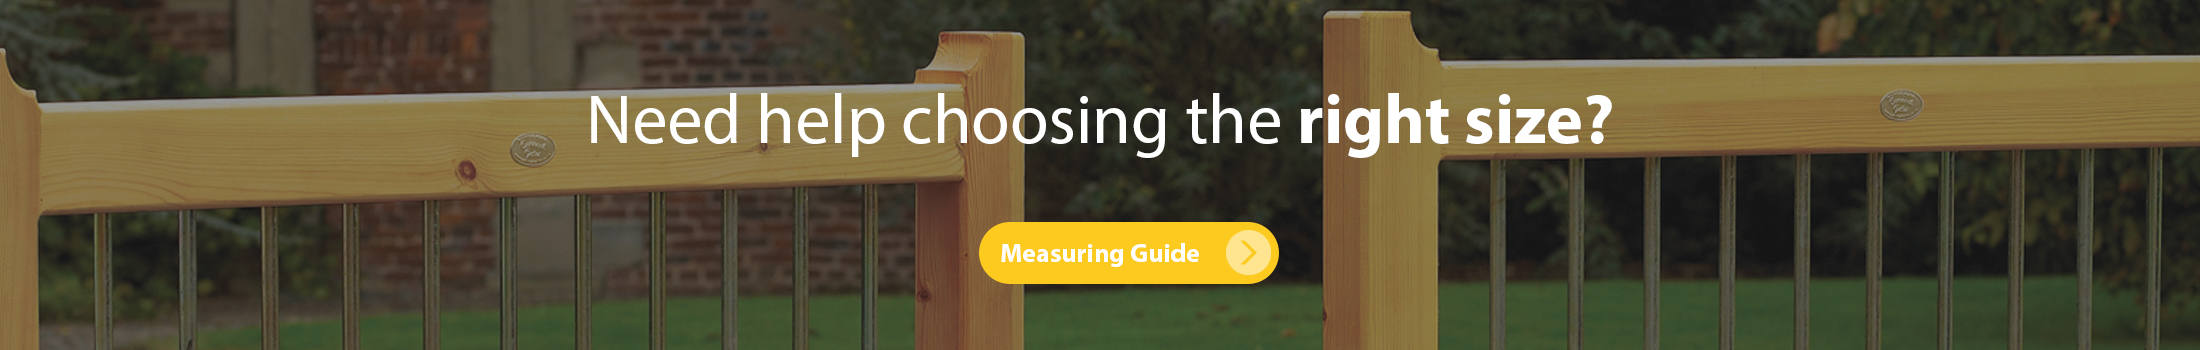 Measuring Guide - Click here for help and advice choosing the correct size gates